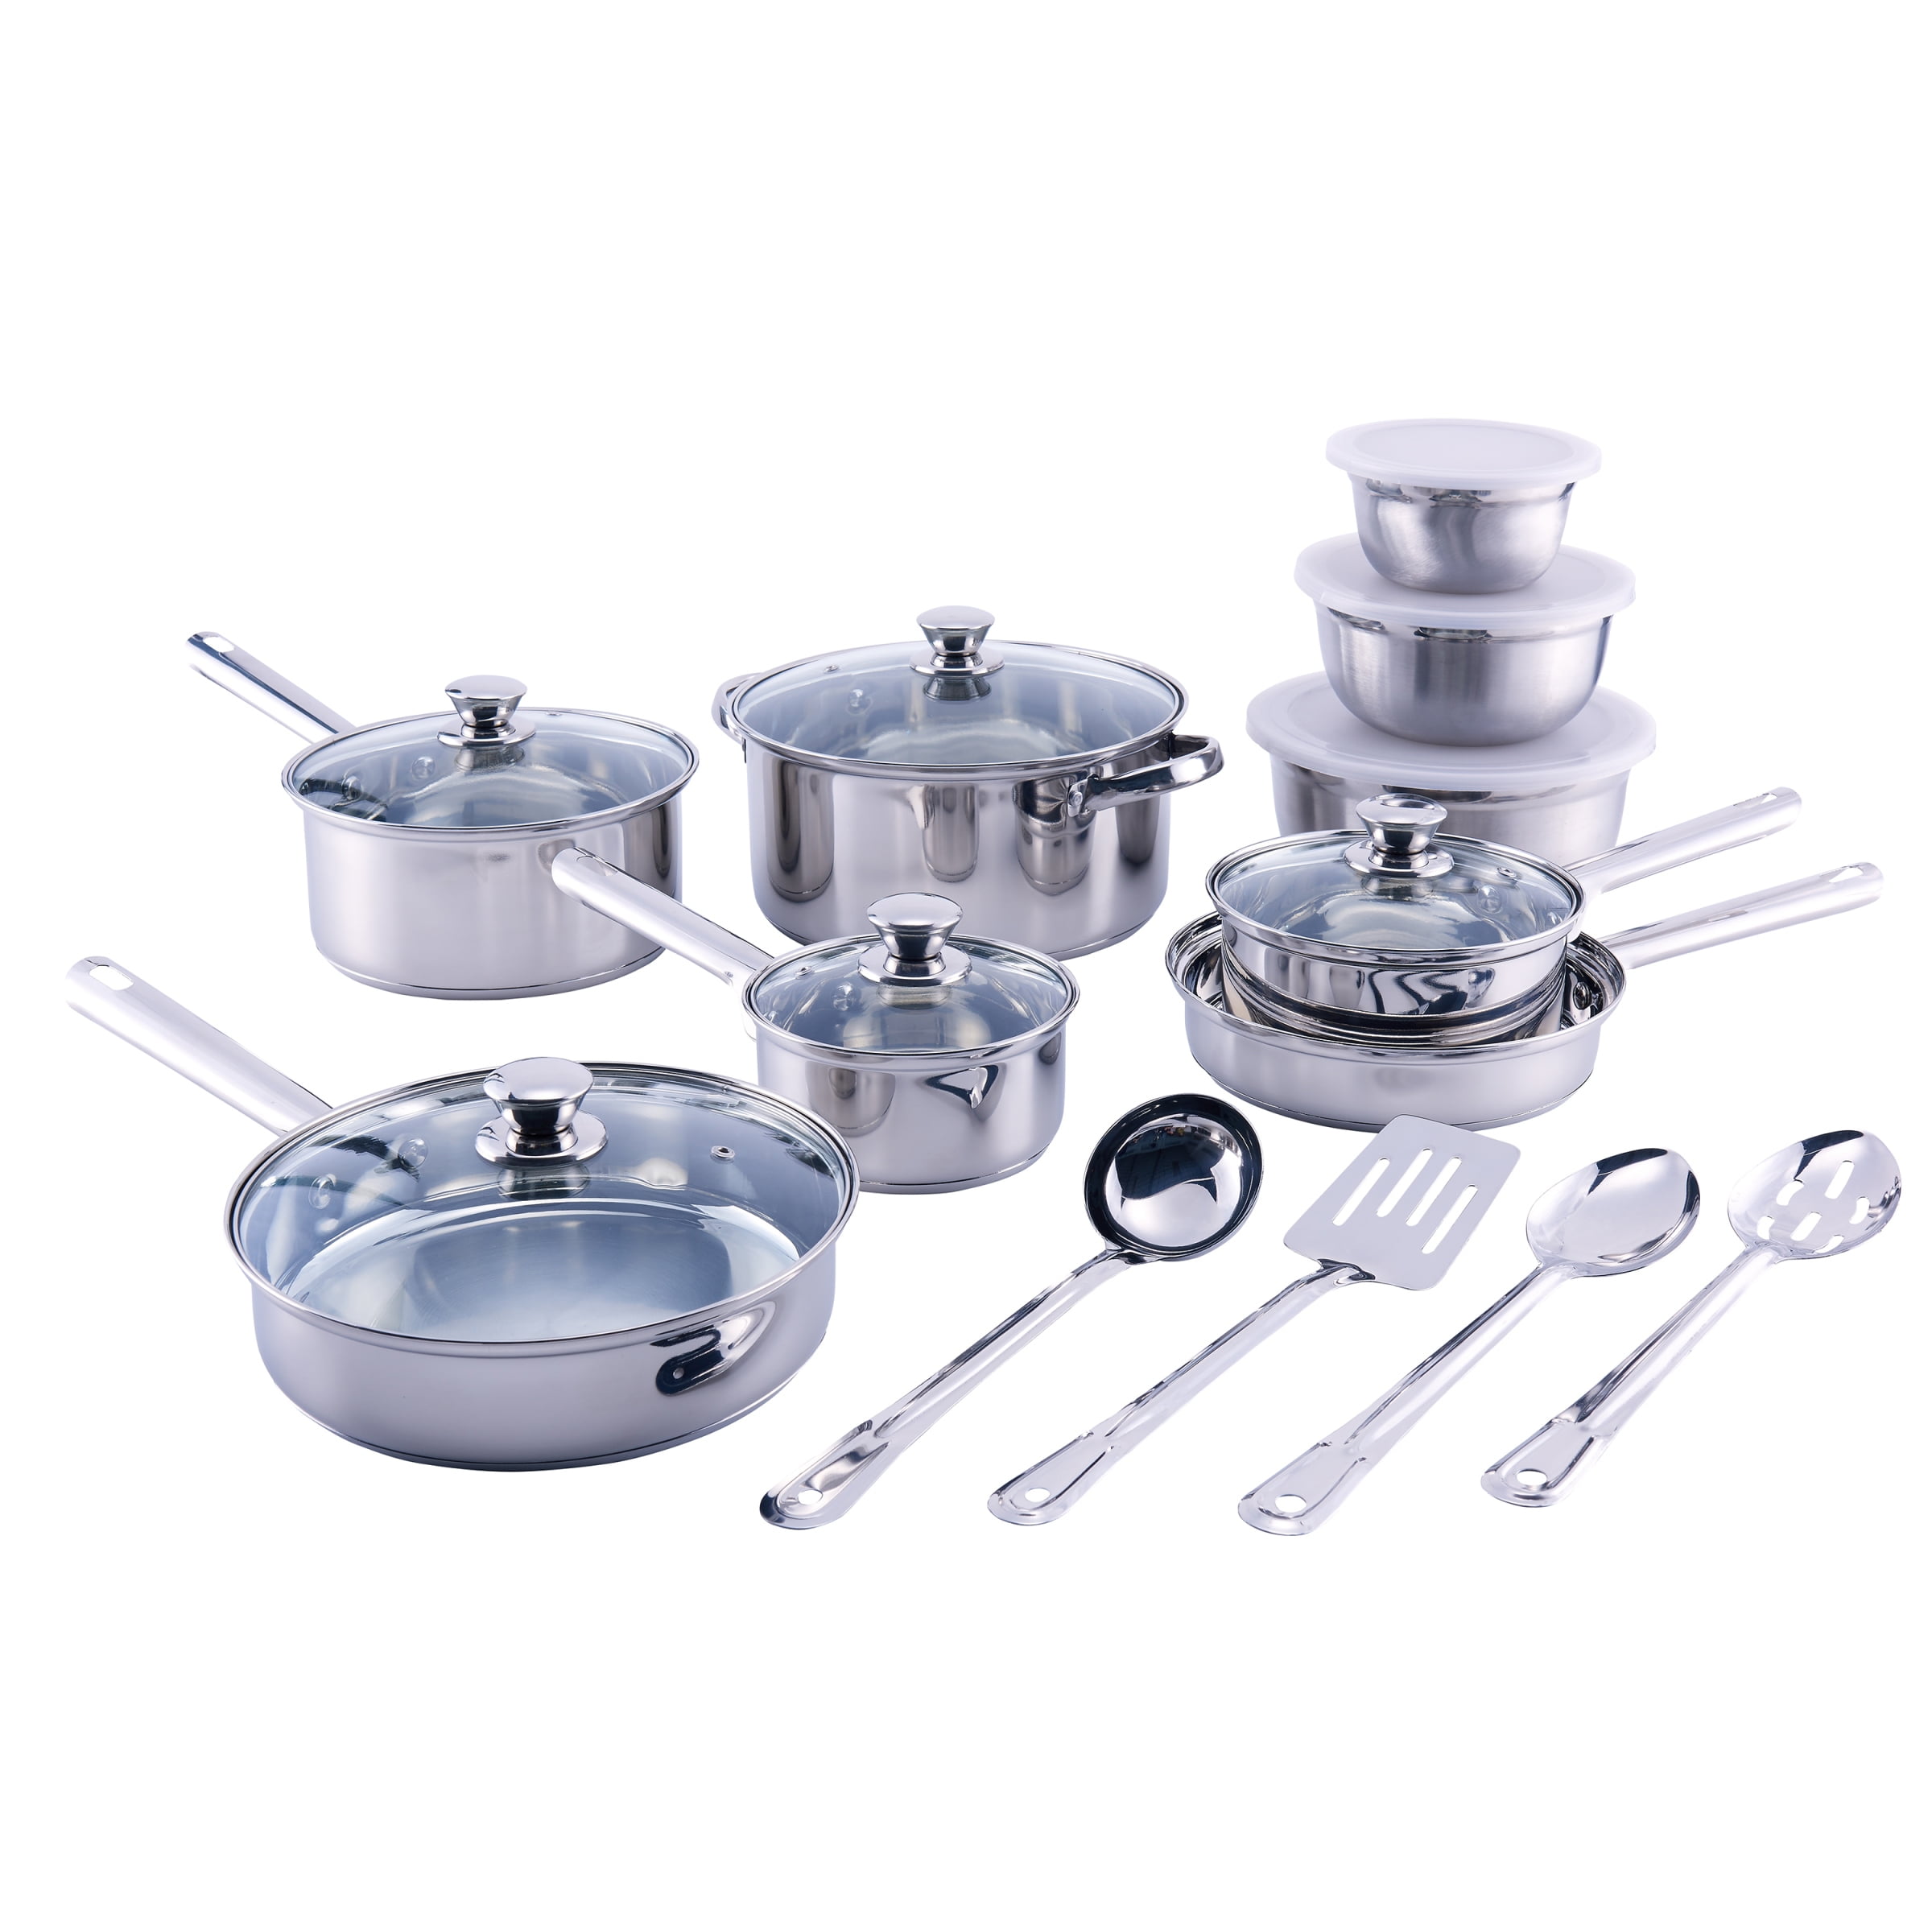 18pc Induction Stainless Steel Cookware Set Kitchen Glass Lids Pot